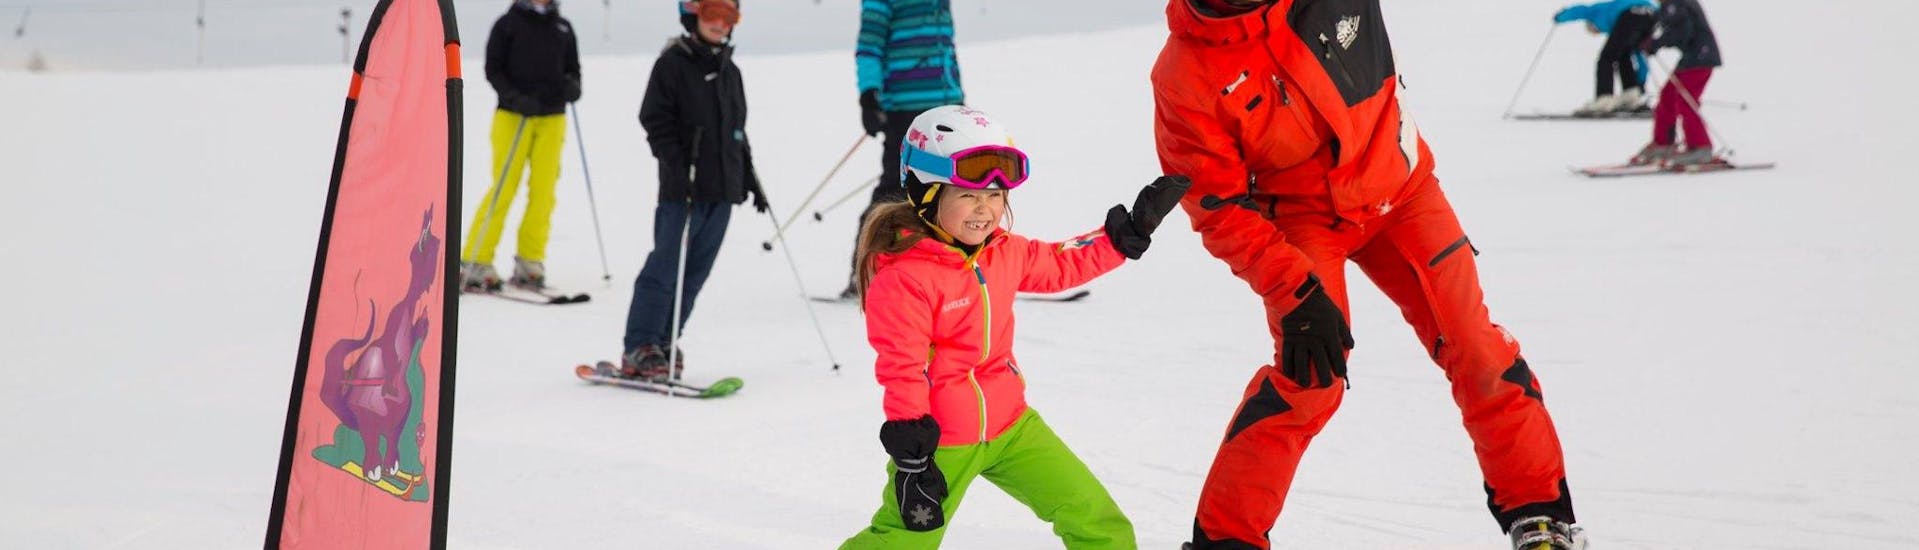 Kids Ski Lessons (from 5 y.) for First Timers from Skischule Zahmer Kaiser.